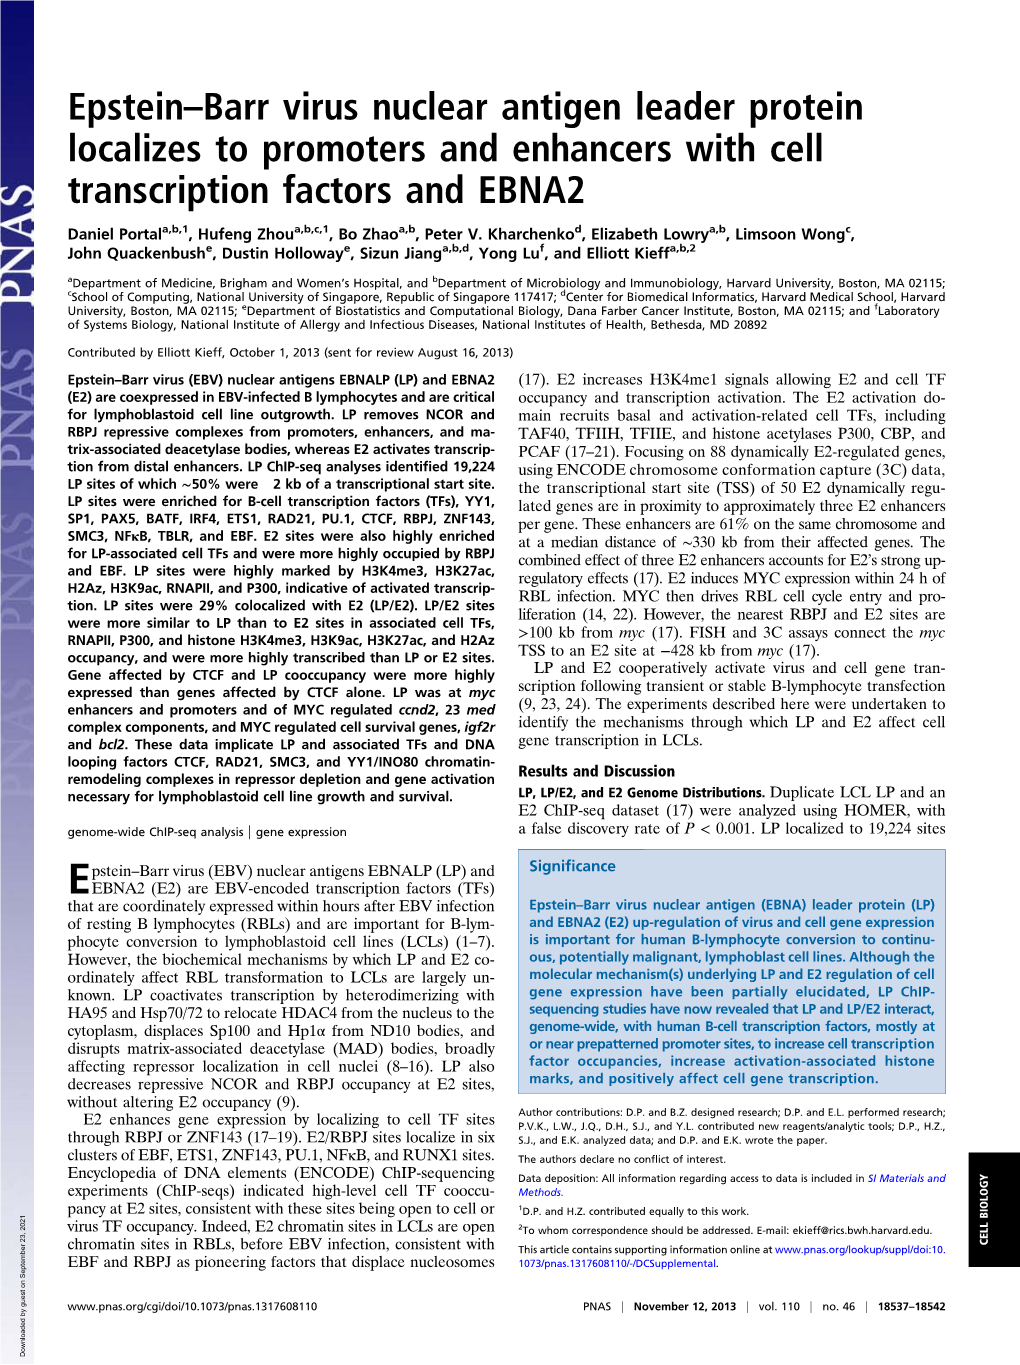 Epstein–Barr Virus Nuclear Antigen Leader Protein Localizes to Promoters and Enhancers with Cell Transcription Factors and EBNA2